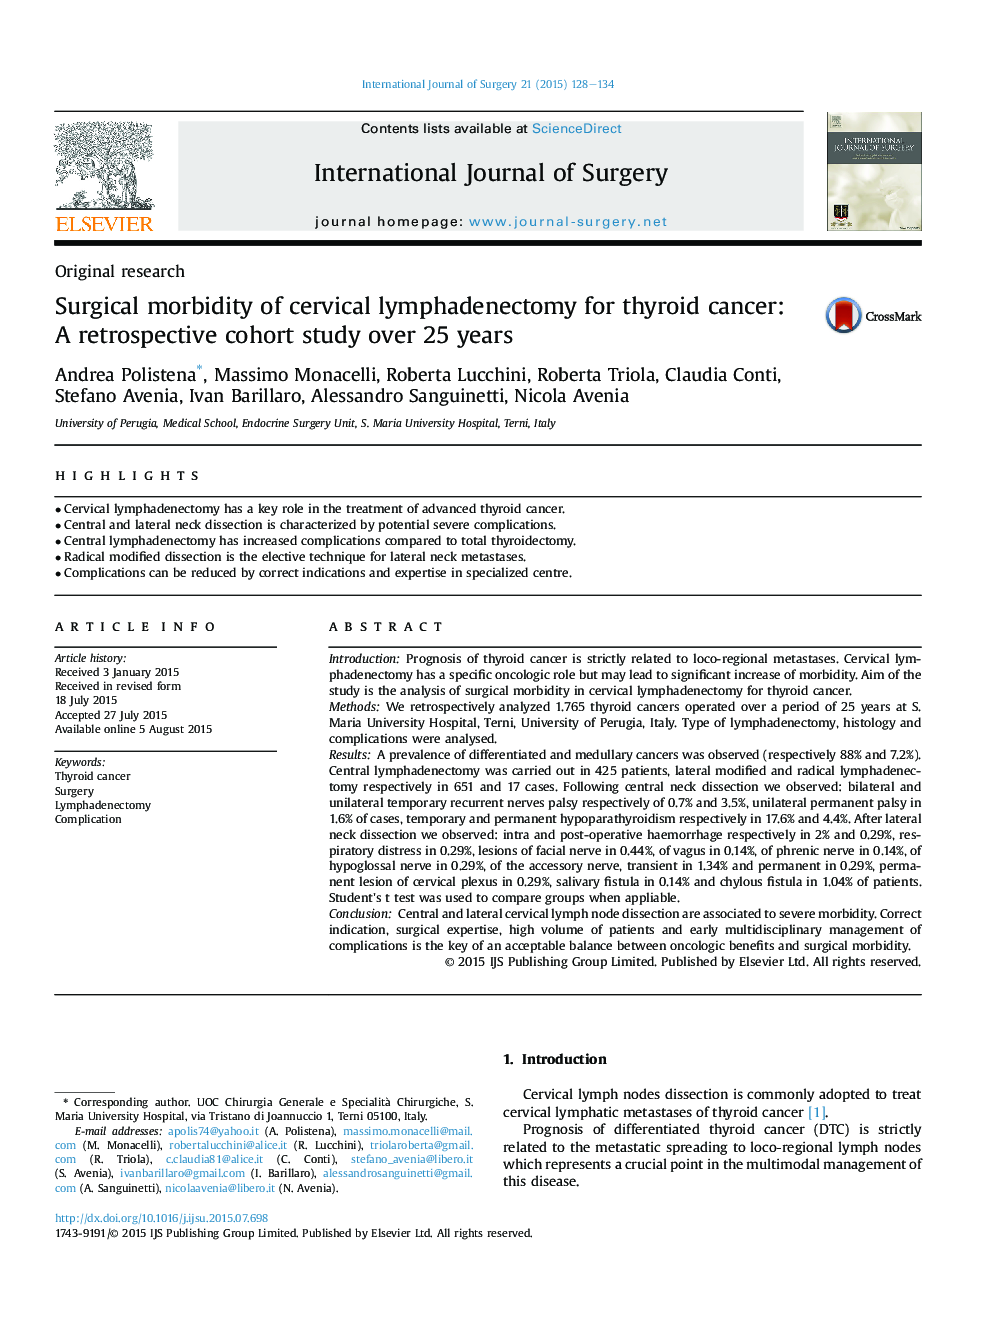 Original researchSurgical morbidity of cervical lymphadenectomy for thyroid cancer: AÂ retrospective cohort study over 25 years